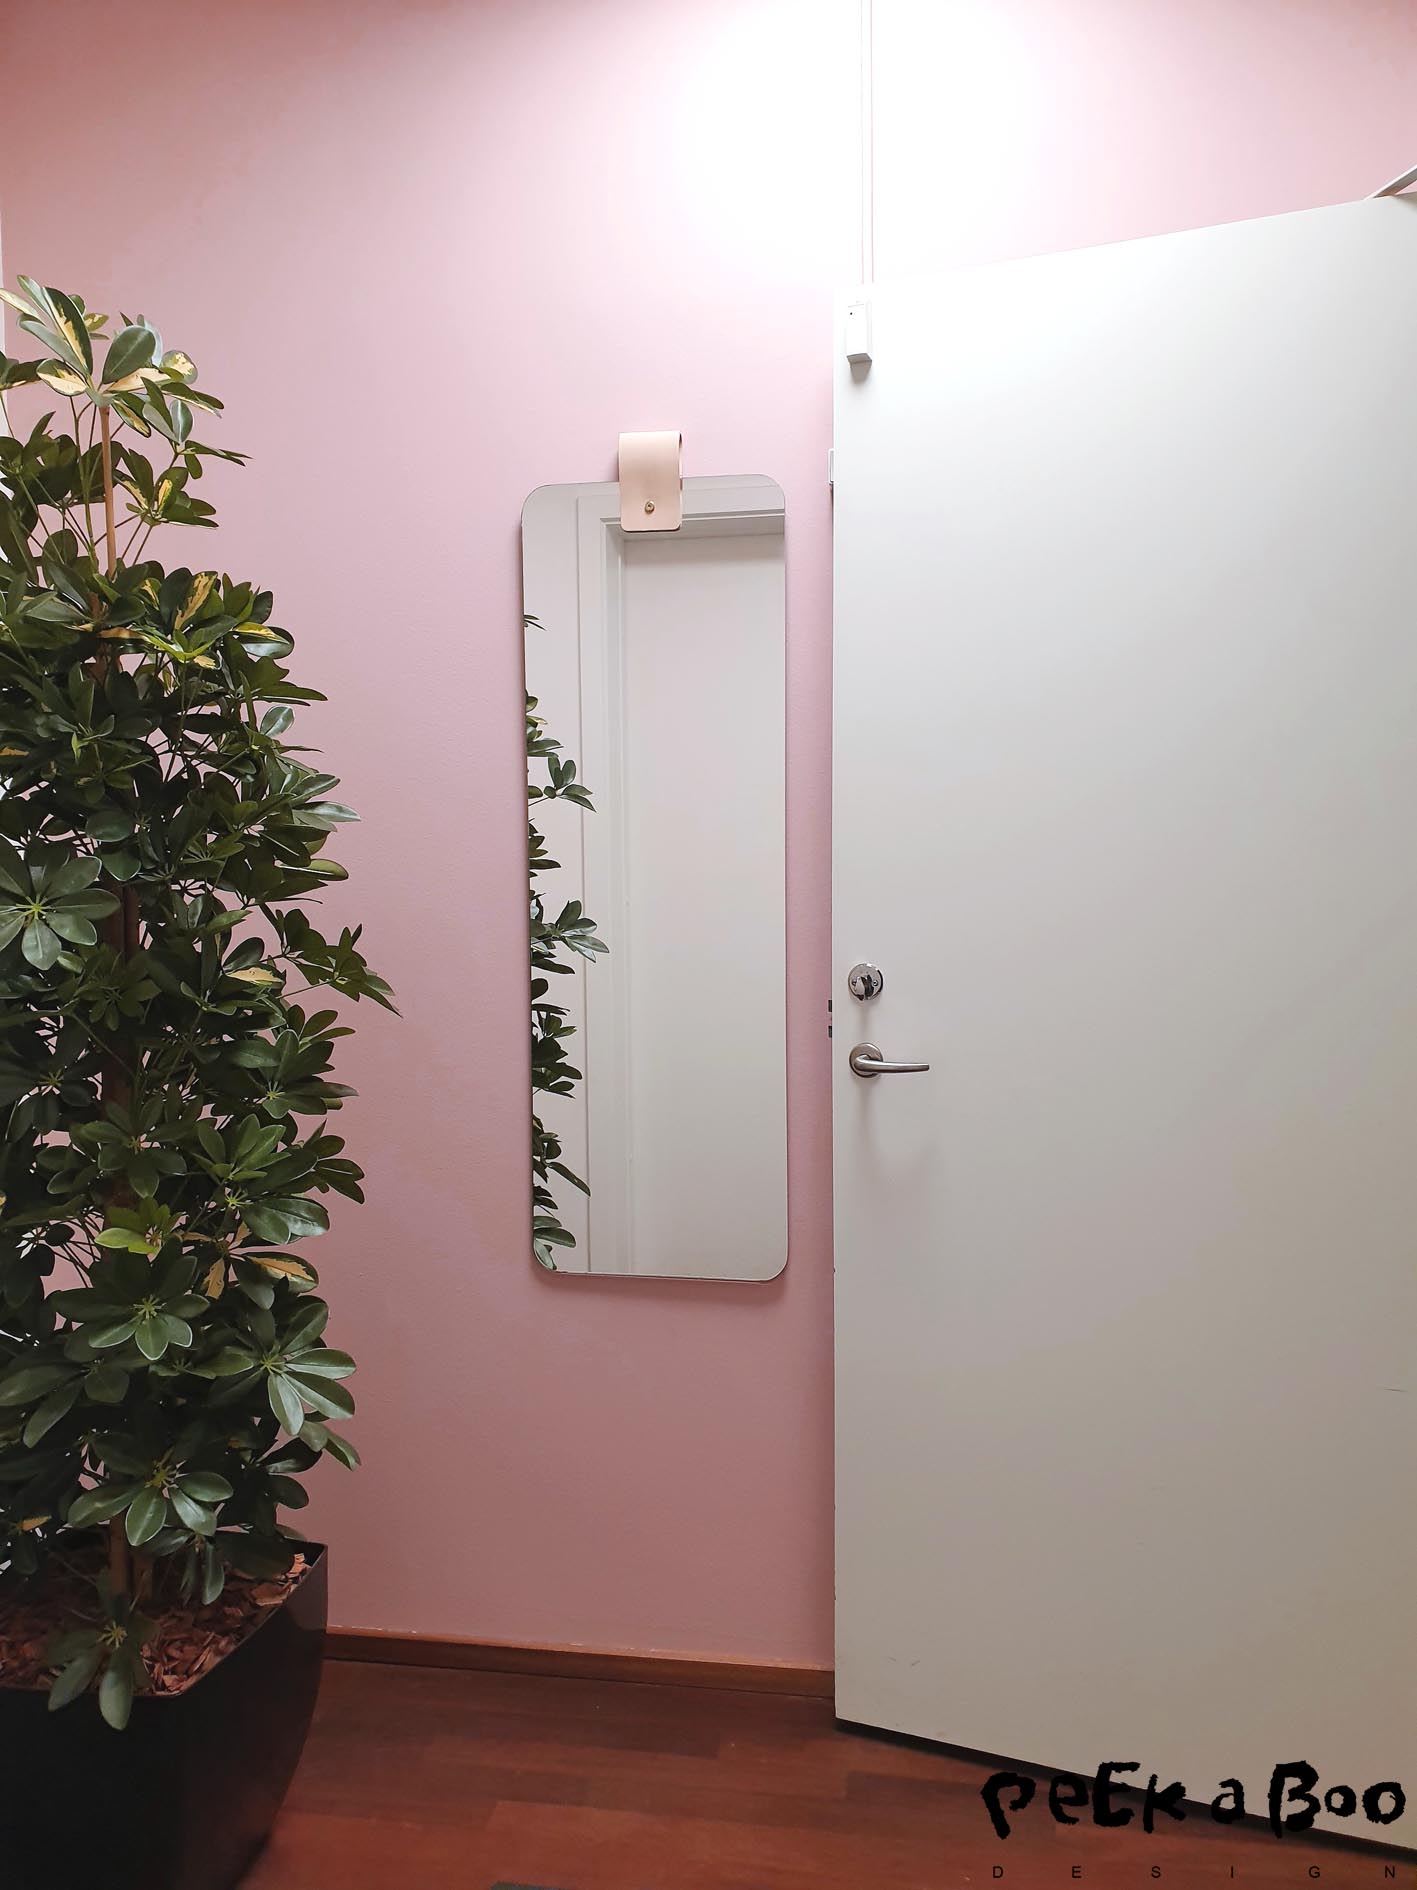 The pink hall is welcoming the visitors. The mirror with leather strap is from the danish design brand Munk Collective and the wall is painted in the Jernoxydrød + zinkhvid no. 4 from Flüggers historic colourcard. Also add some green plants to get a homely feeling. YOu can always find some in Plantorama.